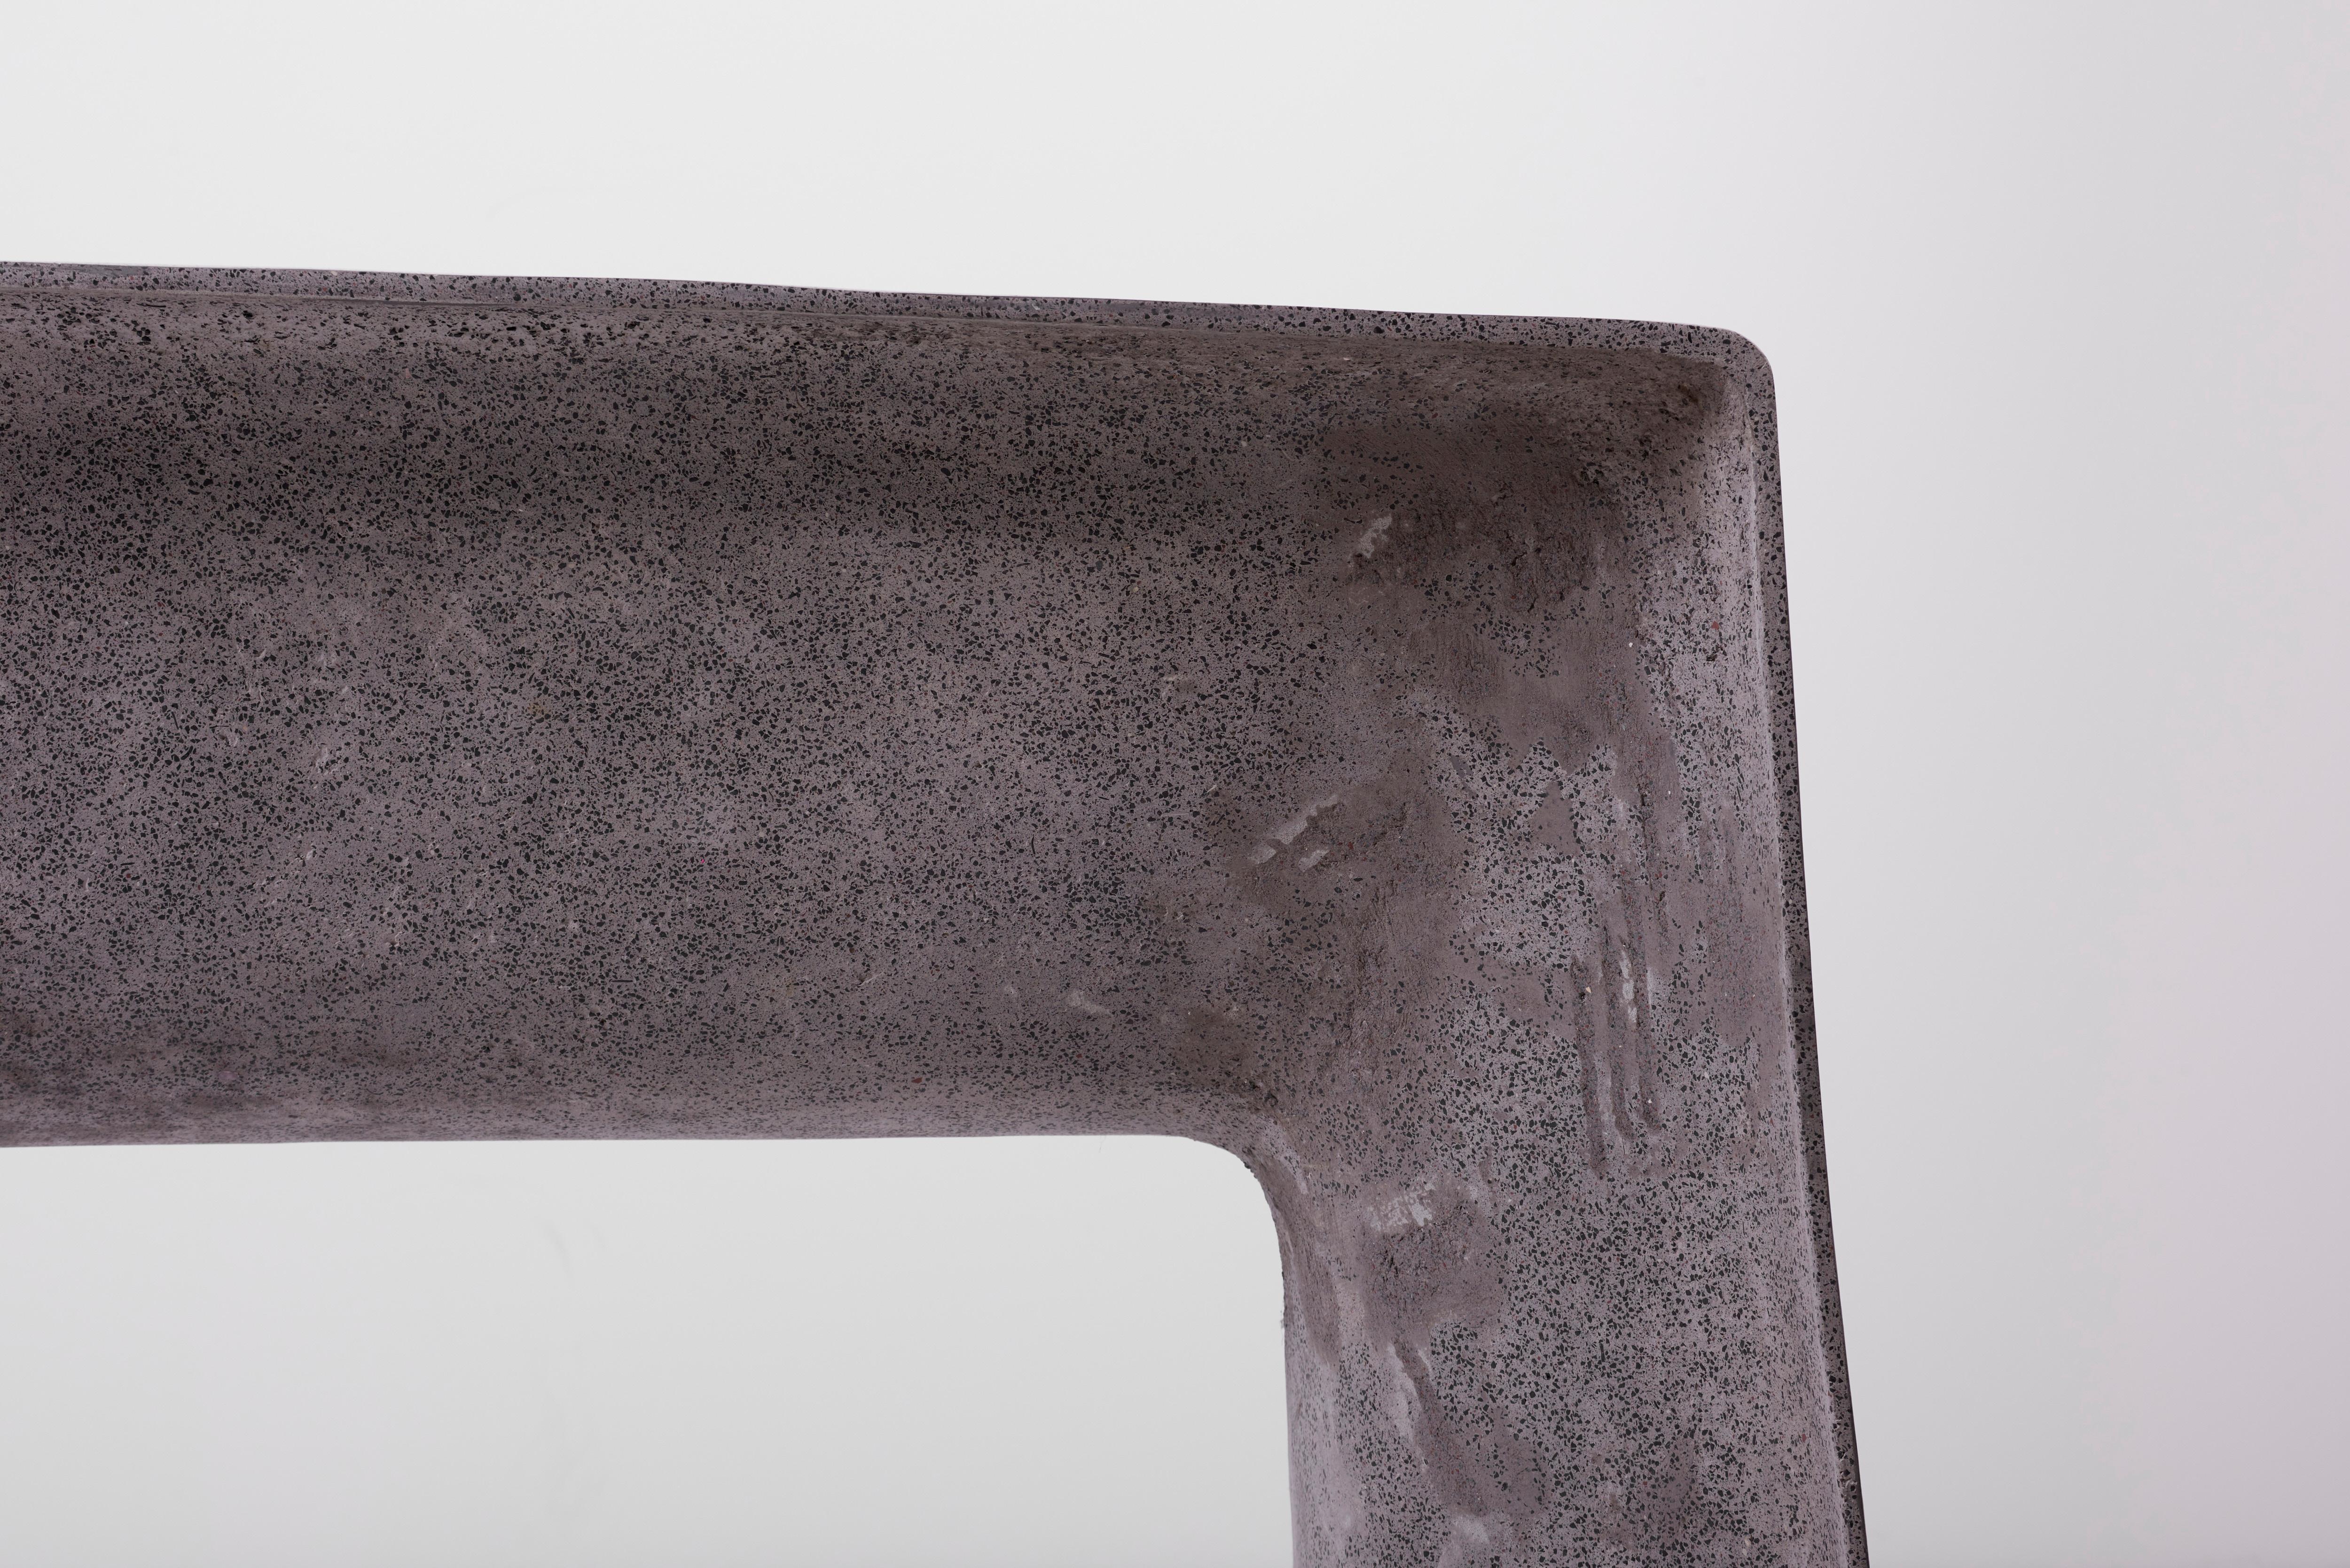 Architectural Concrete Bench by Martin Kleppe, Germany, circa 2011 For Sale 6